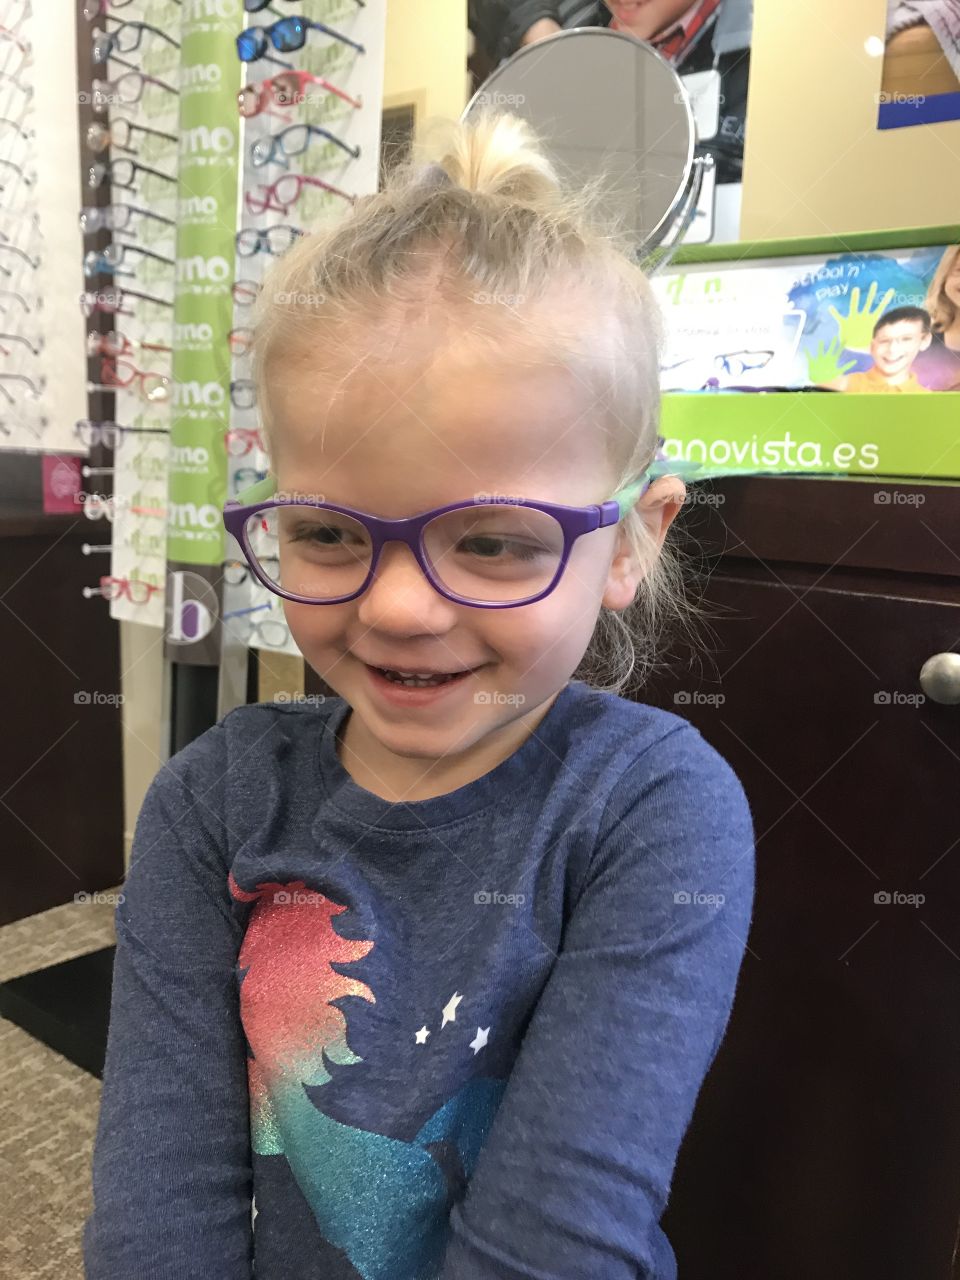 First pair of glasses